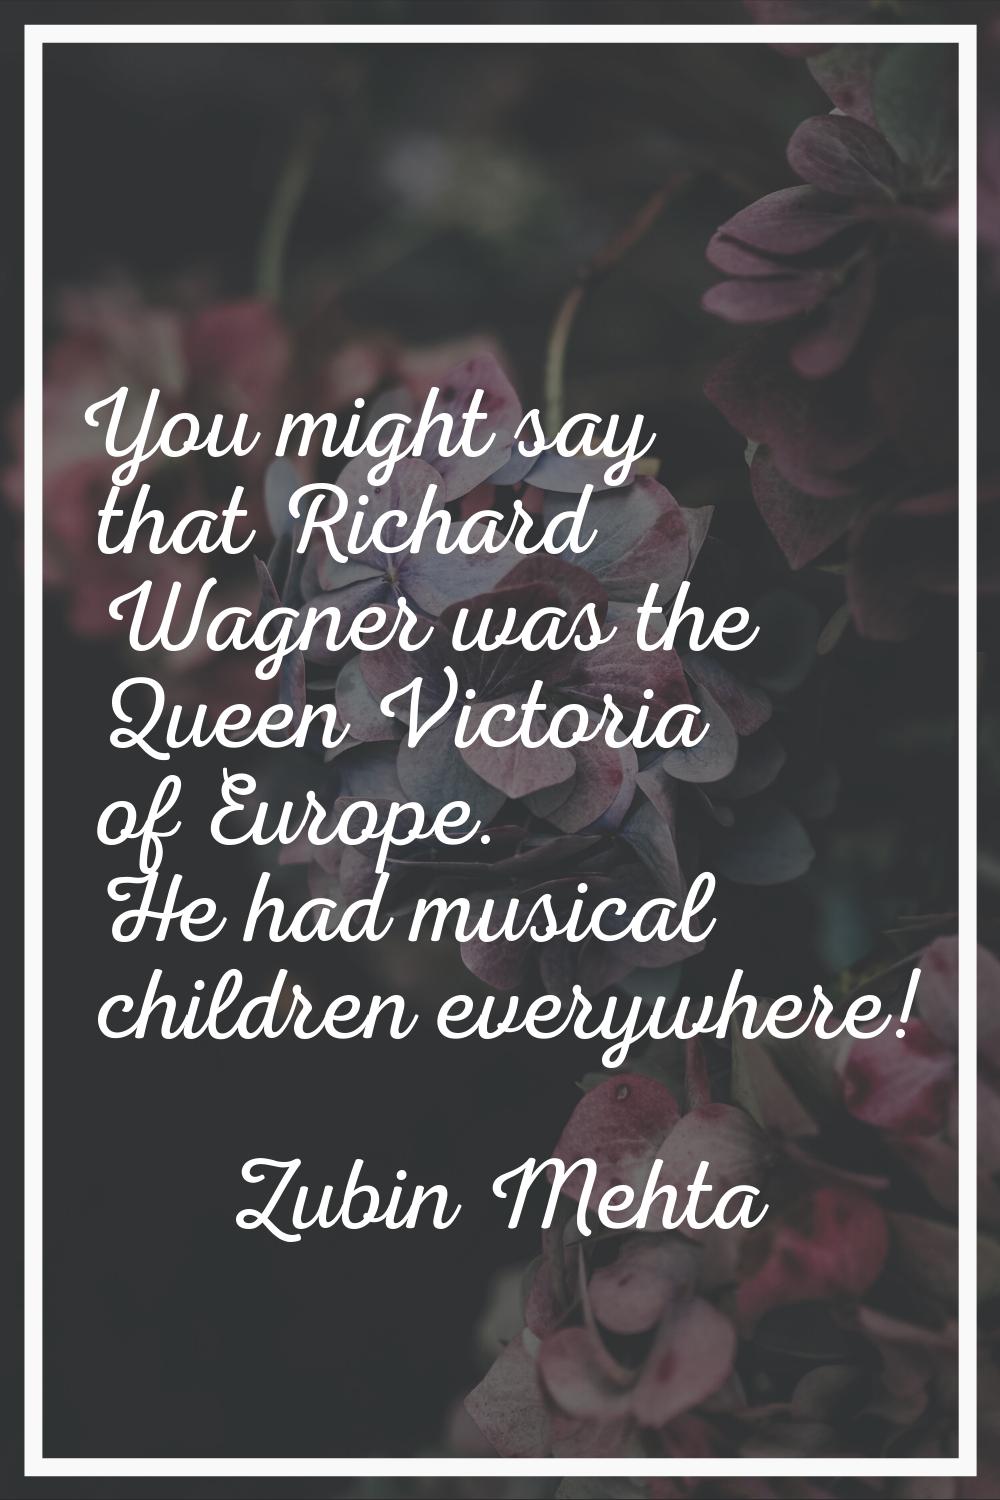 You might say that Richard Wagner was the Queen Victoria of Europe. He had musical children everywh